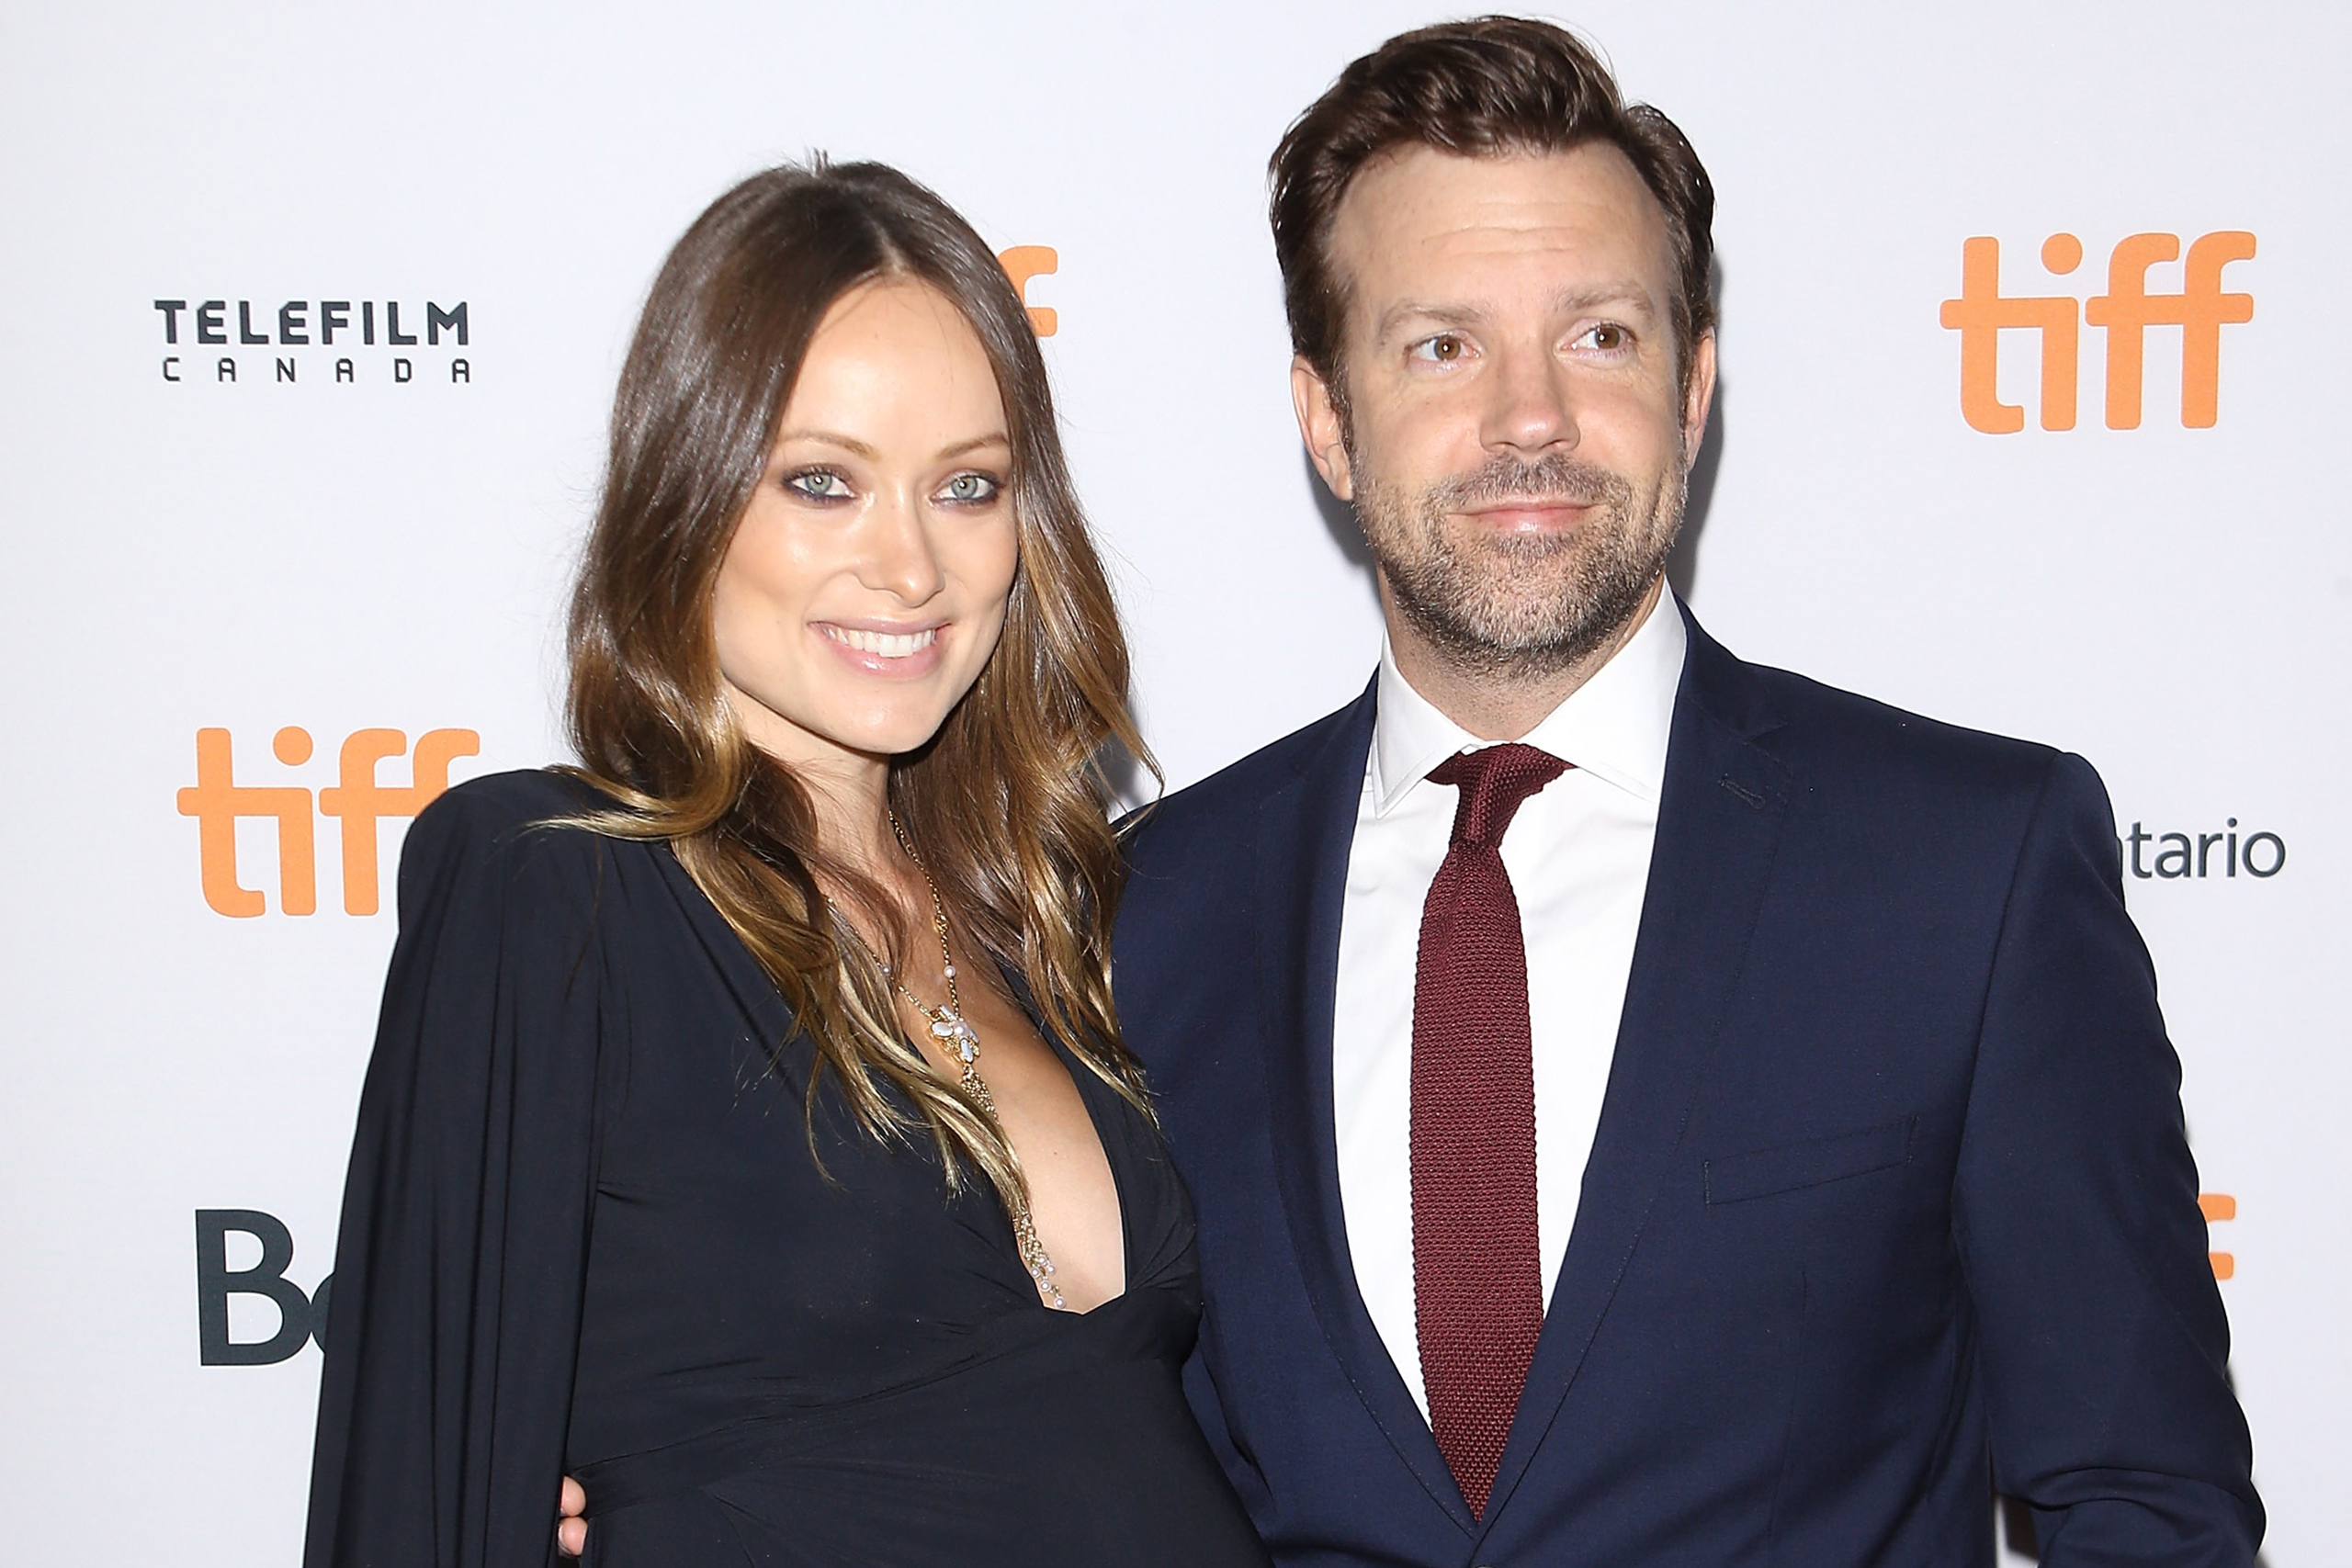 Olivia Wilde and Jason Sudeikis arrive at the 2016 Toronto International Film Festival's "Colossal" premiere at Ryerson Theatre in Toronto on Sept. 9, 2016. (Michael Tran—Getty Images)